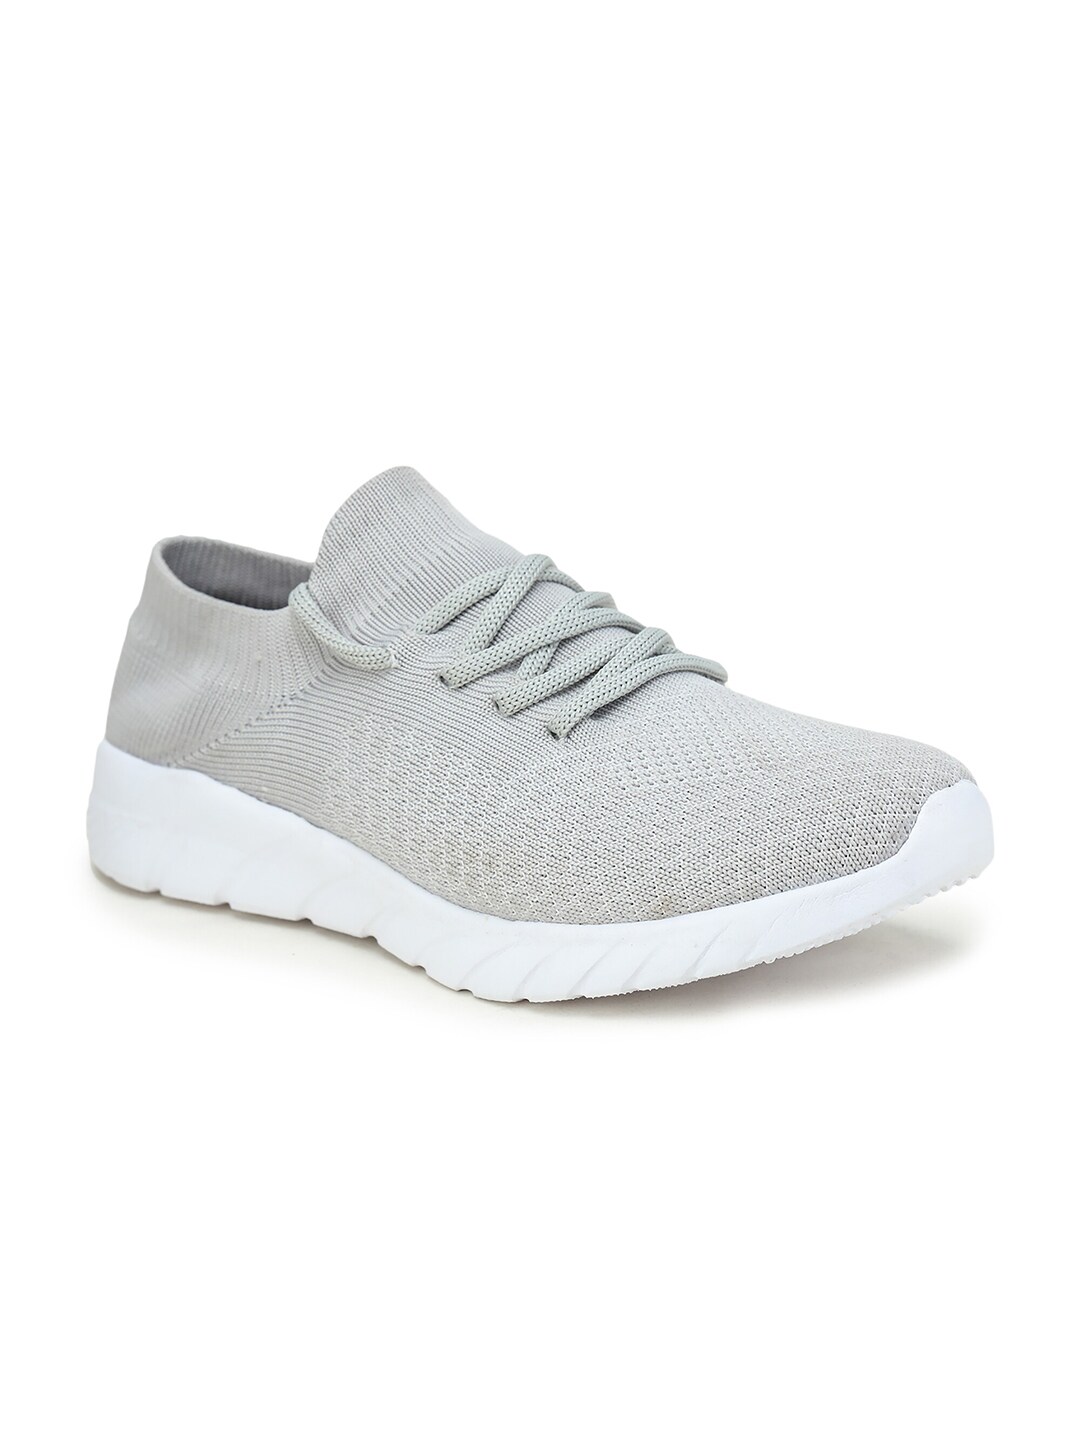 TRASE Women Grey Running Shoes Price in India